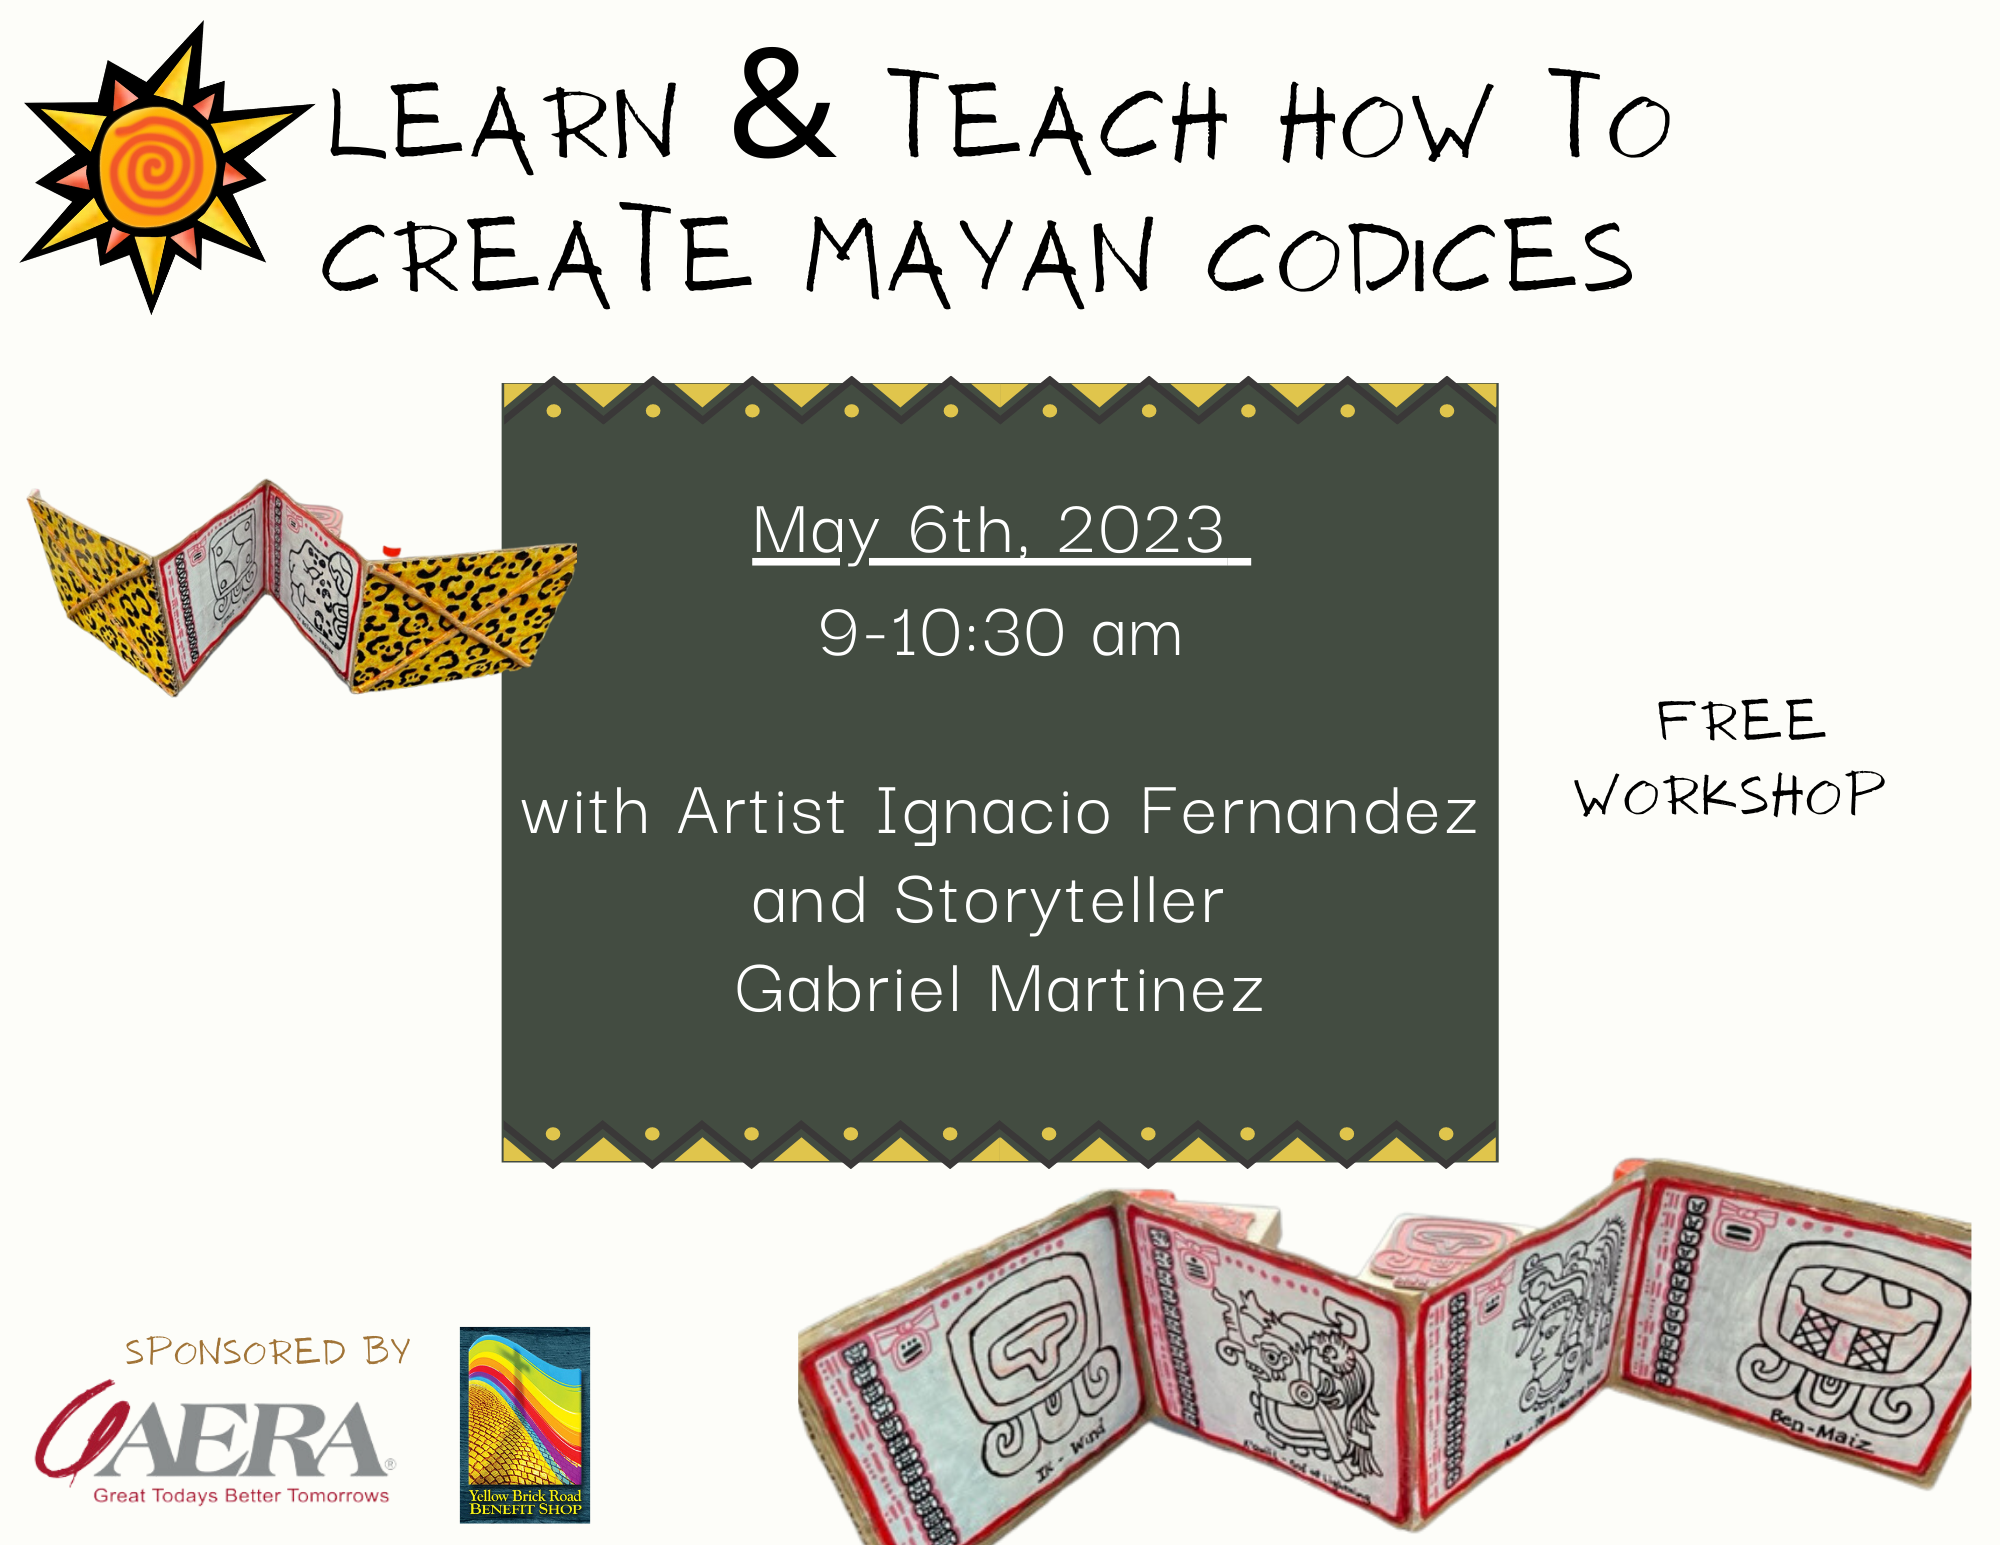 Flyer for "Learn and Tech How to Create Mayan Codices" with instructor Ignacio Fernandez and storyteller Gabriel Martinez. May 6th, 2023 9 - 10:30am.